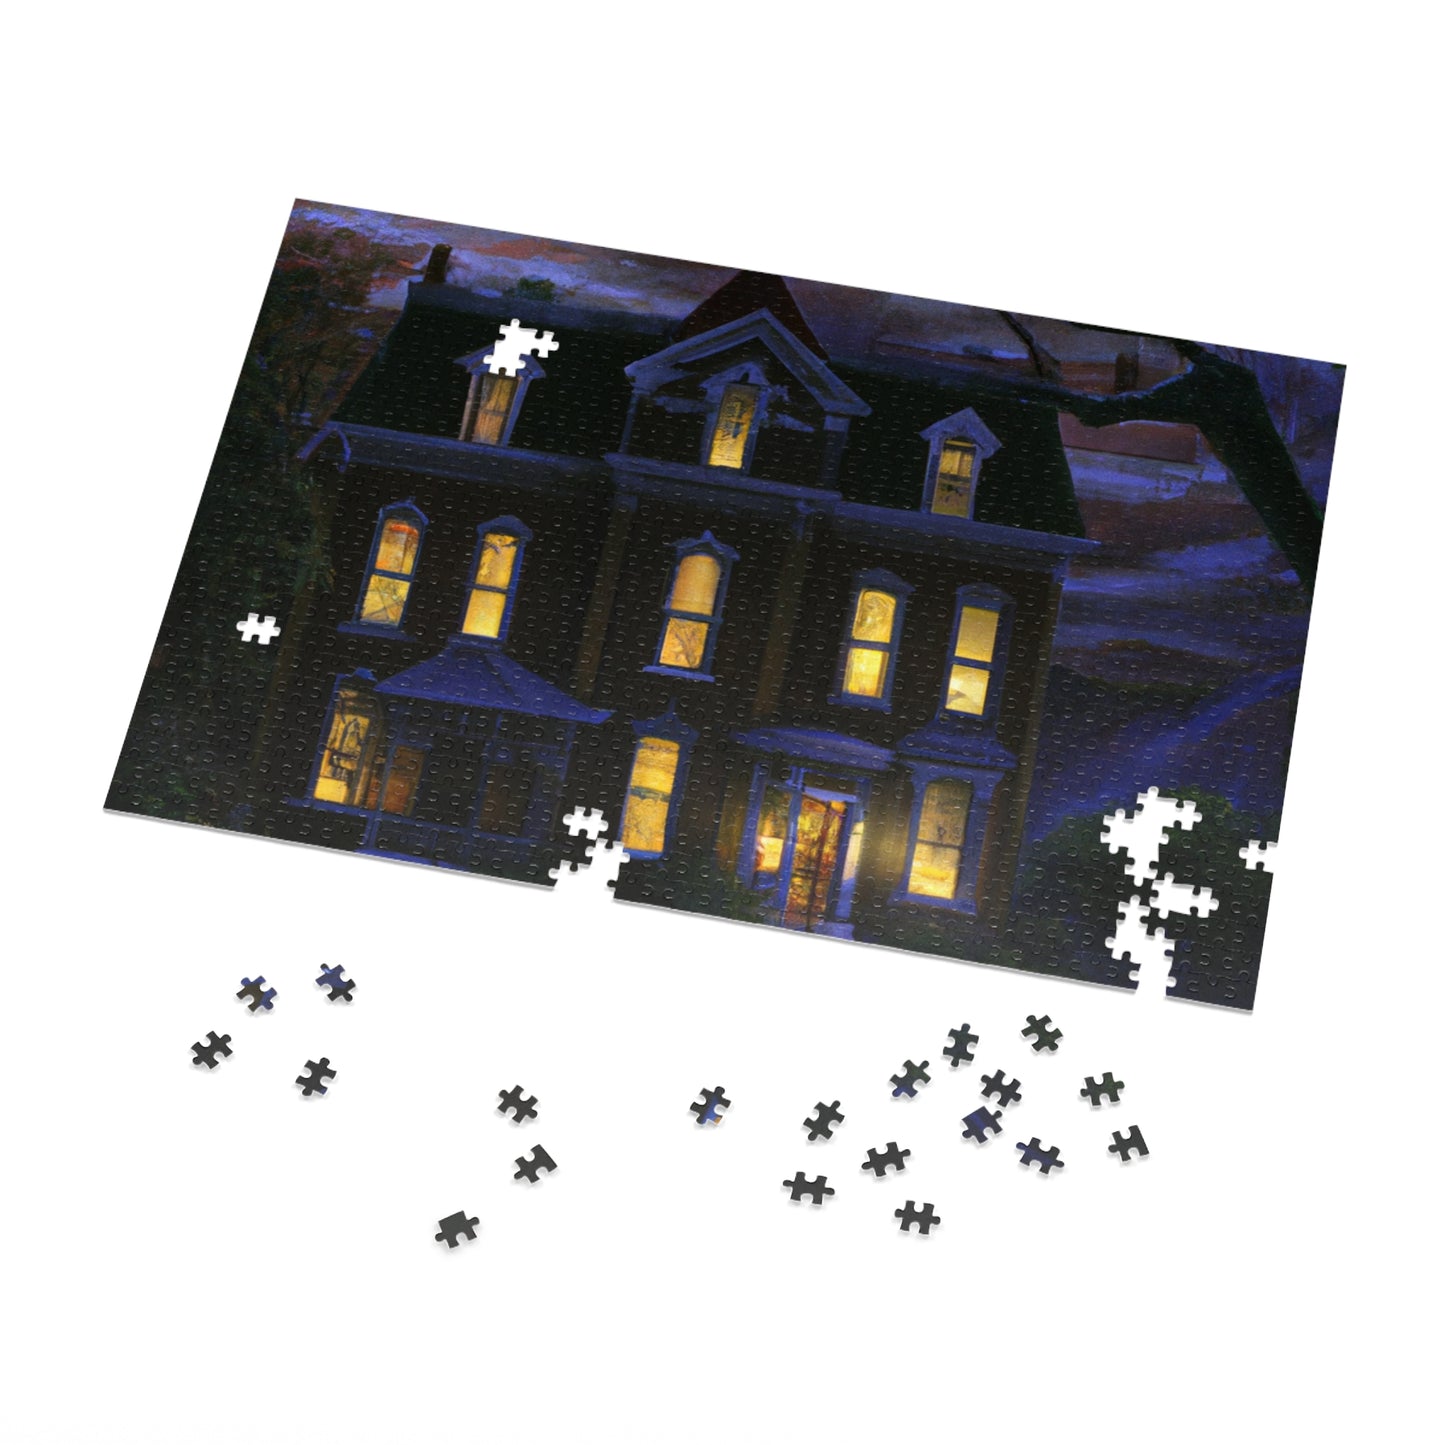 The Haunted Mansion - JigSaw Puzzle 1000 Piece: Arthur Hauntwell - Halloween Gift | Spooky Scenes